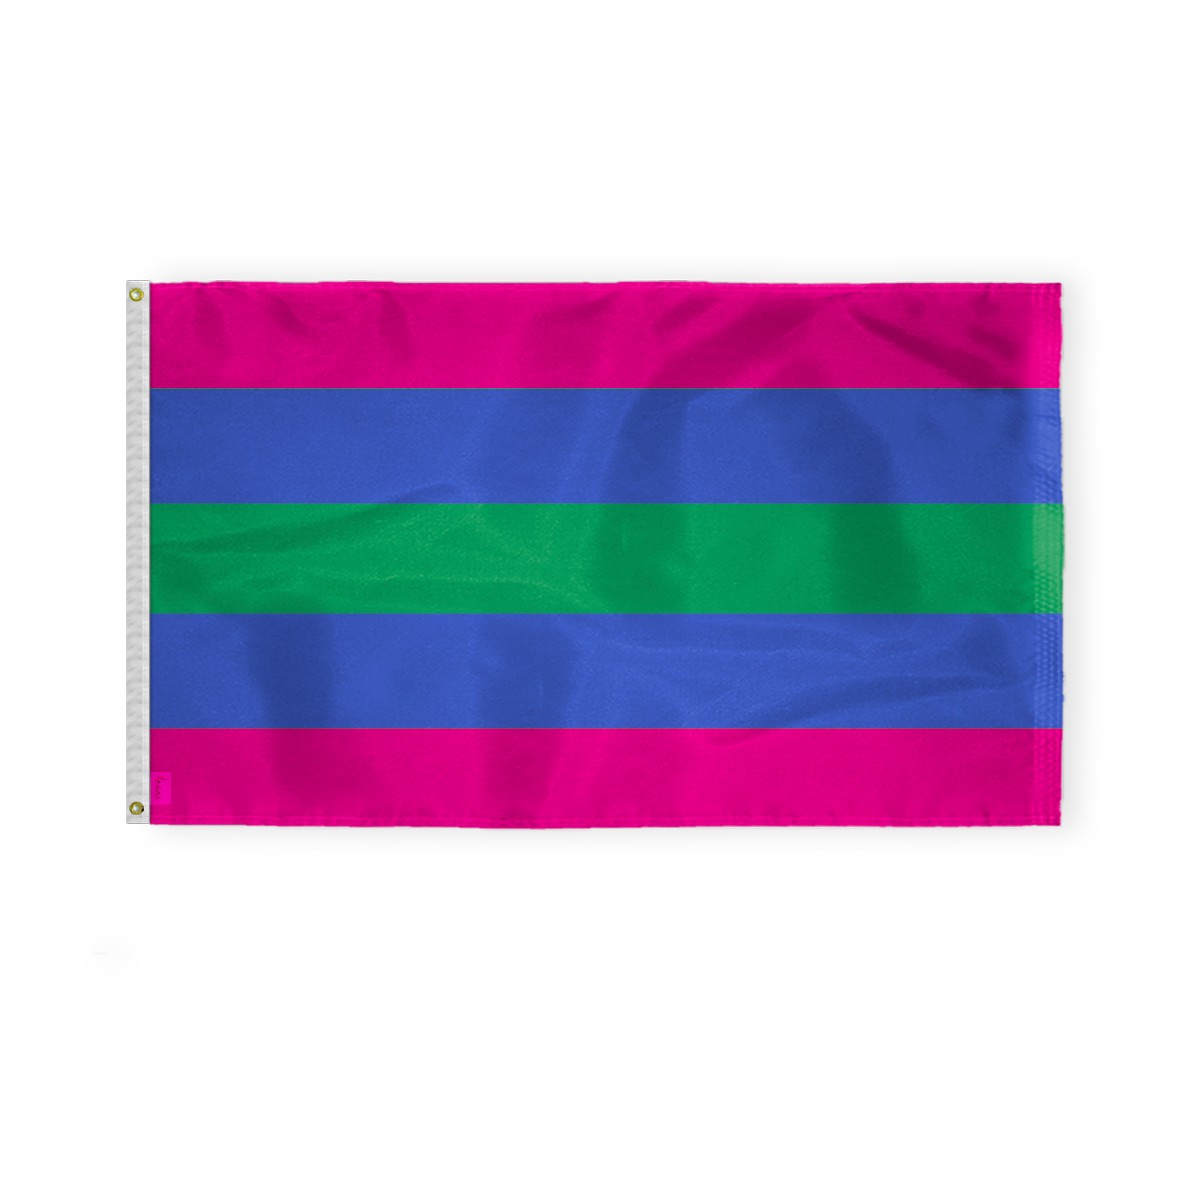 AGAS Trigender Pride Flag 3x5 Ft - Double Sided Printed 200D Nylon